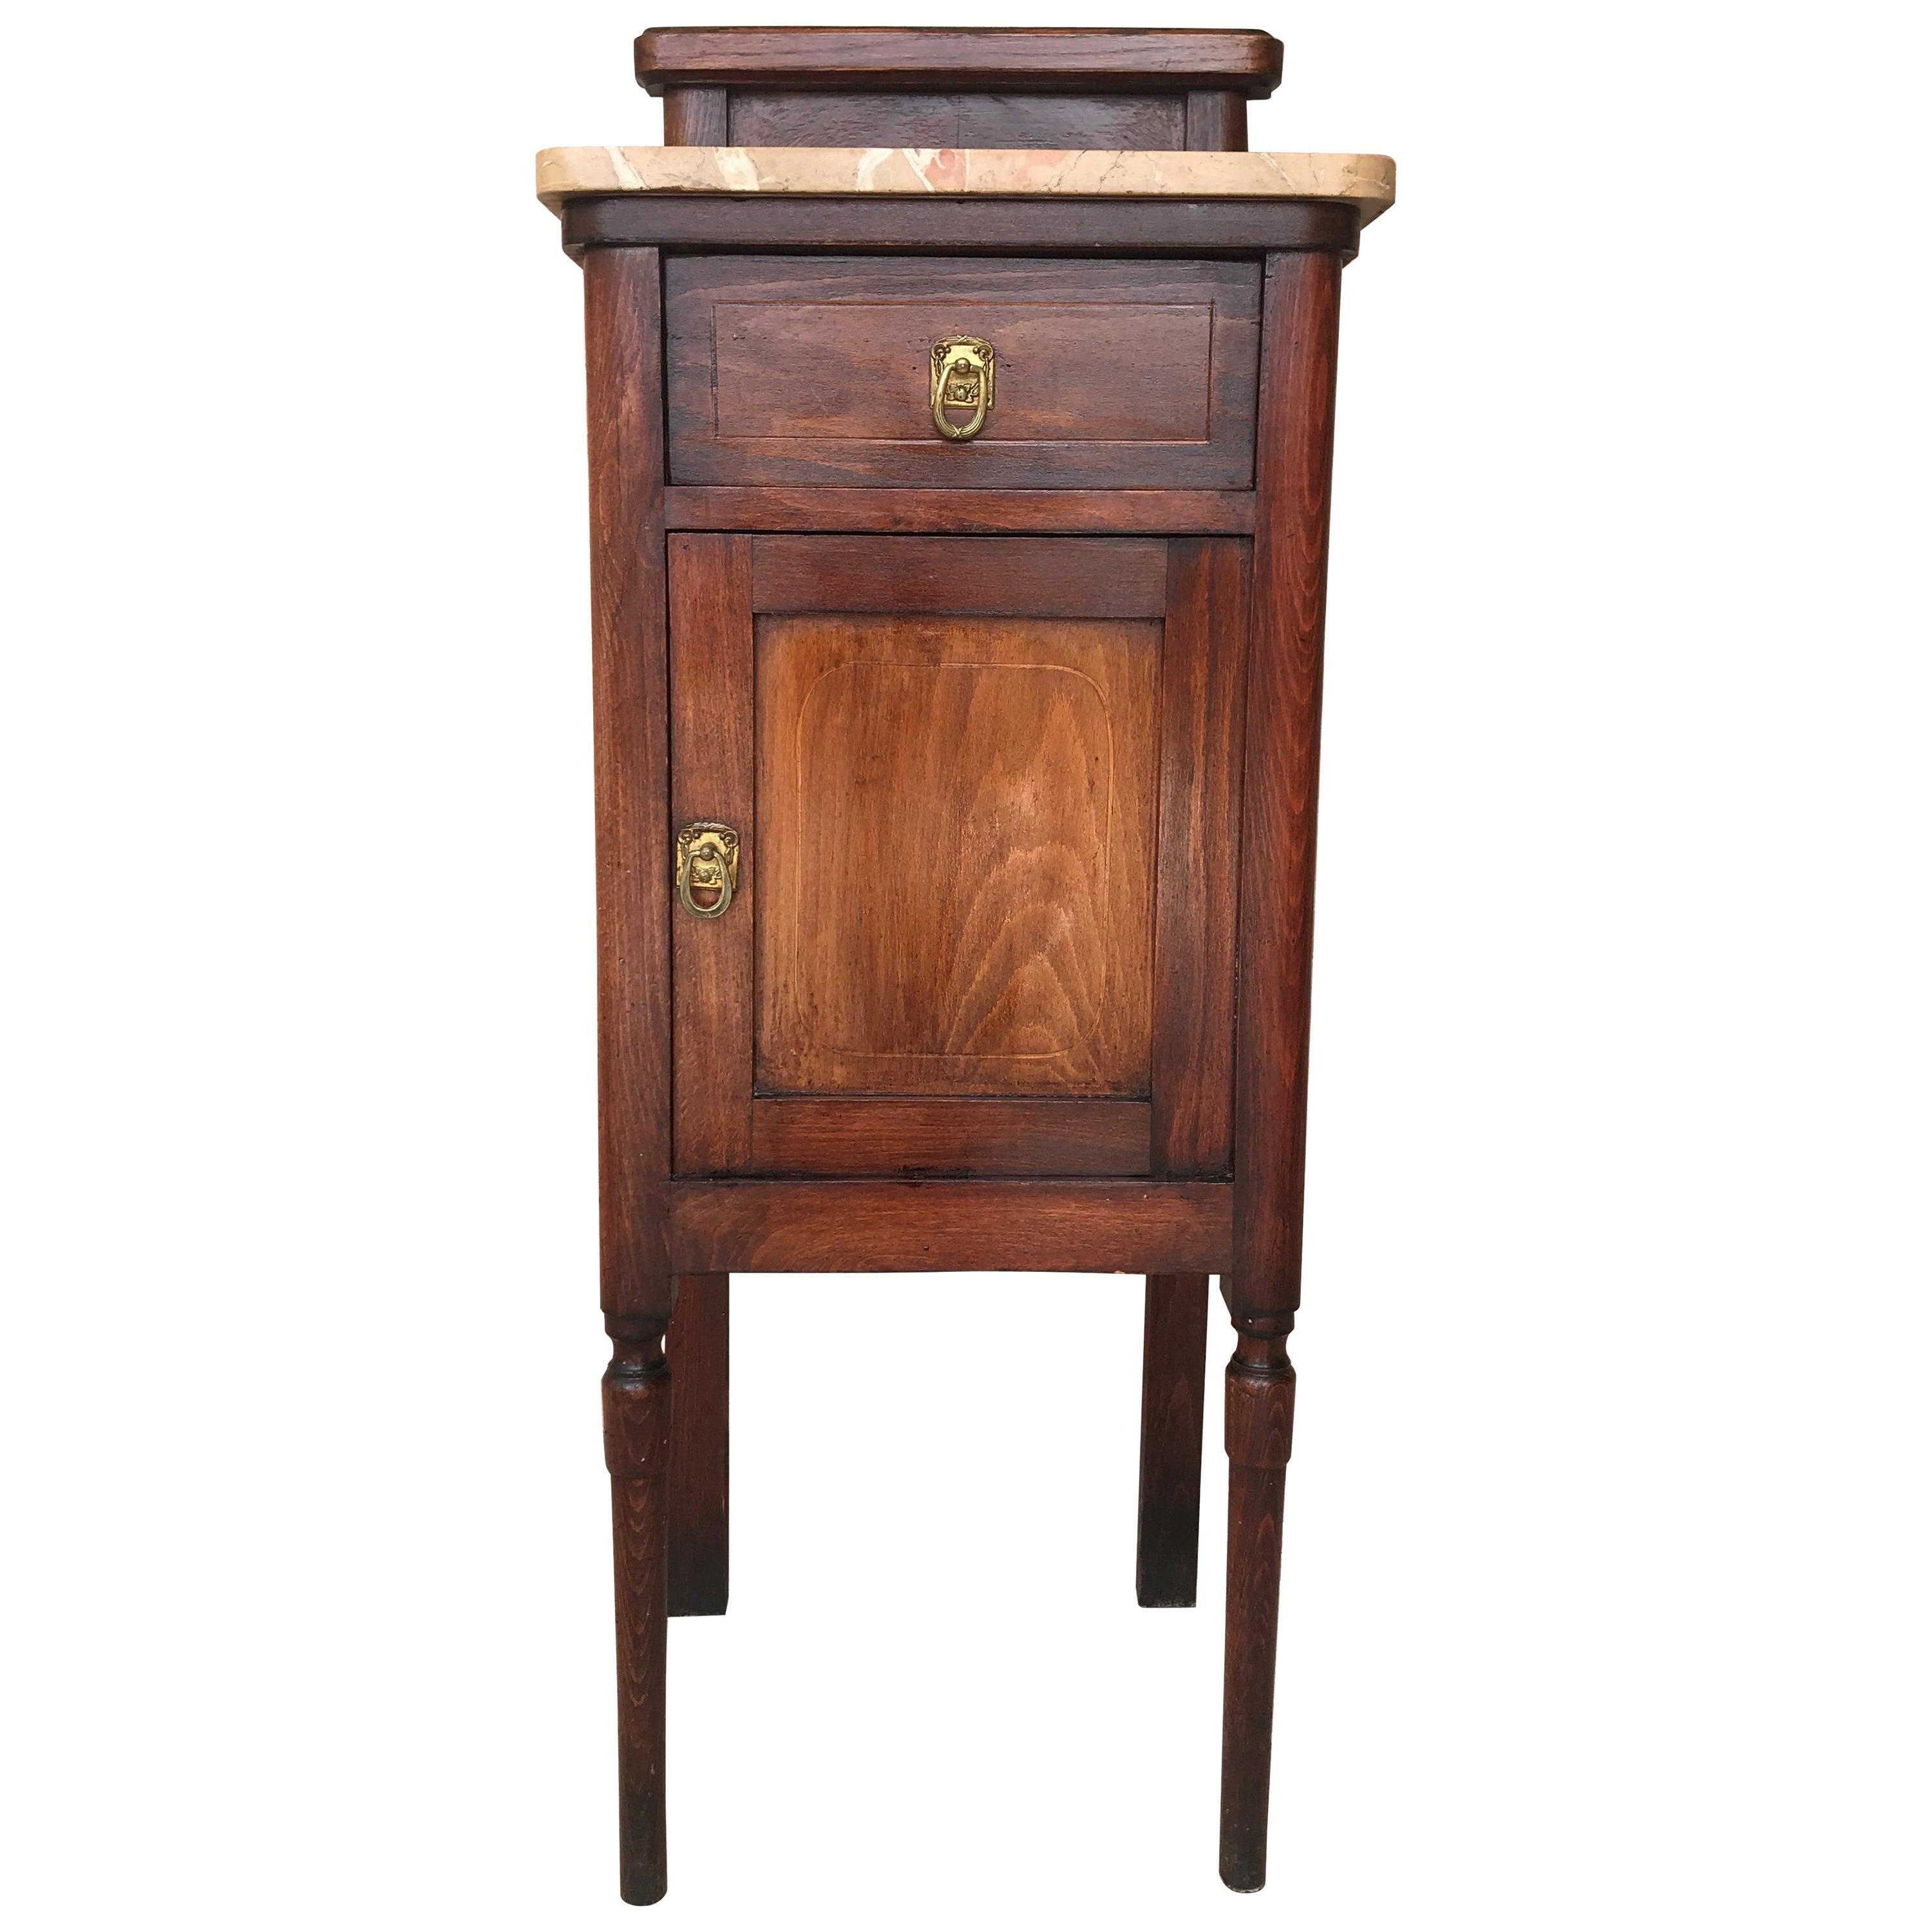 Art Nouveau Walnut Nightstand with Crest, Marble Top and Glass Shelve For Sale